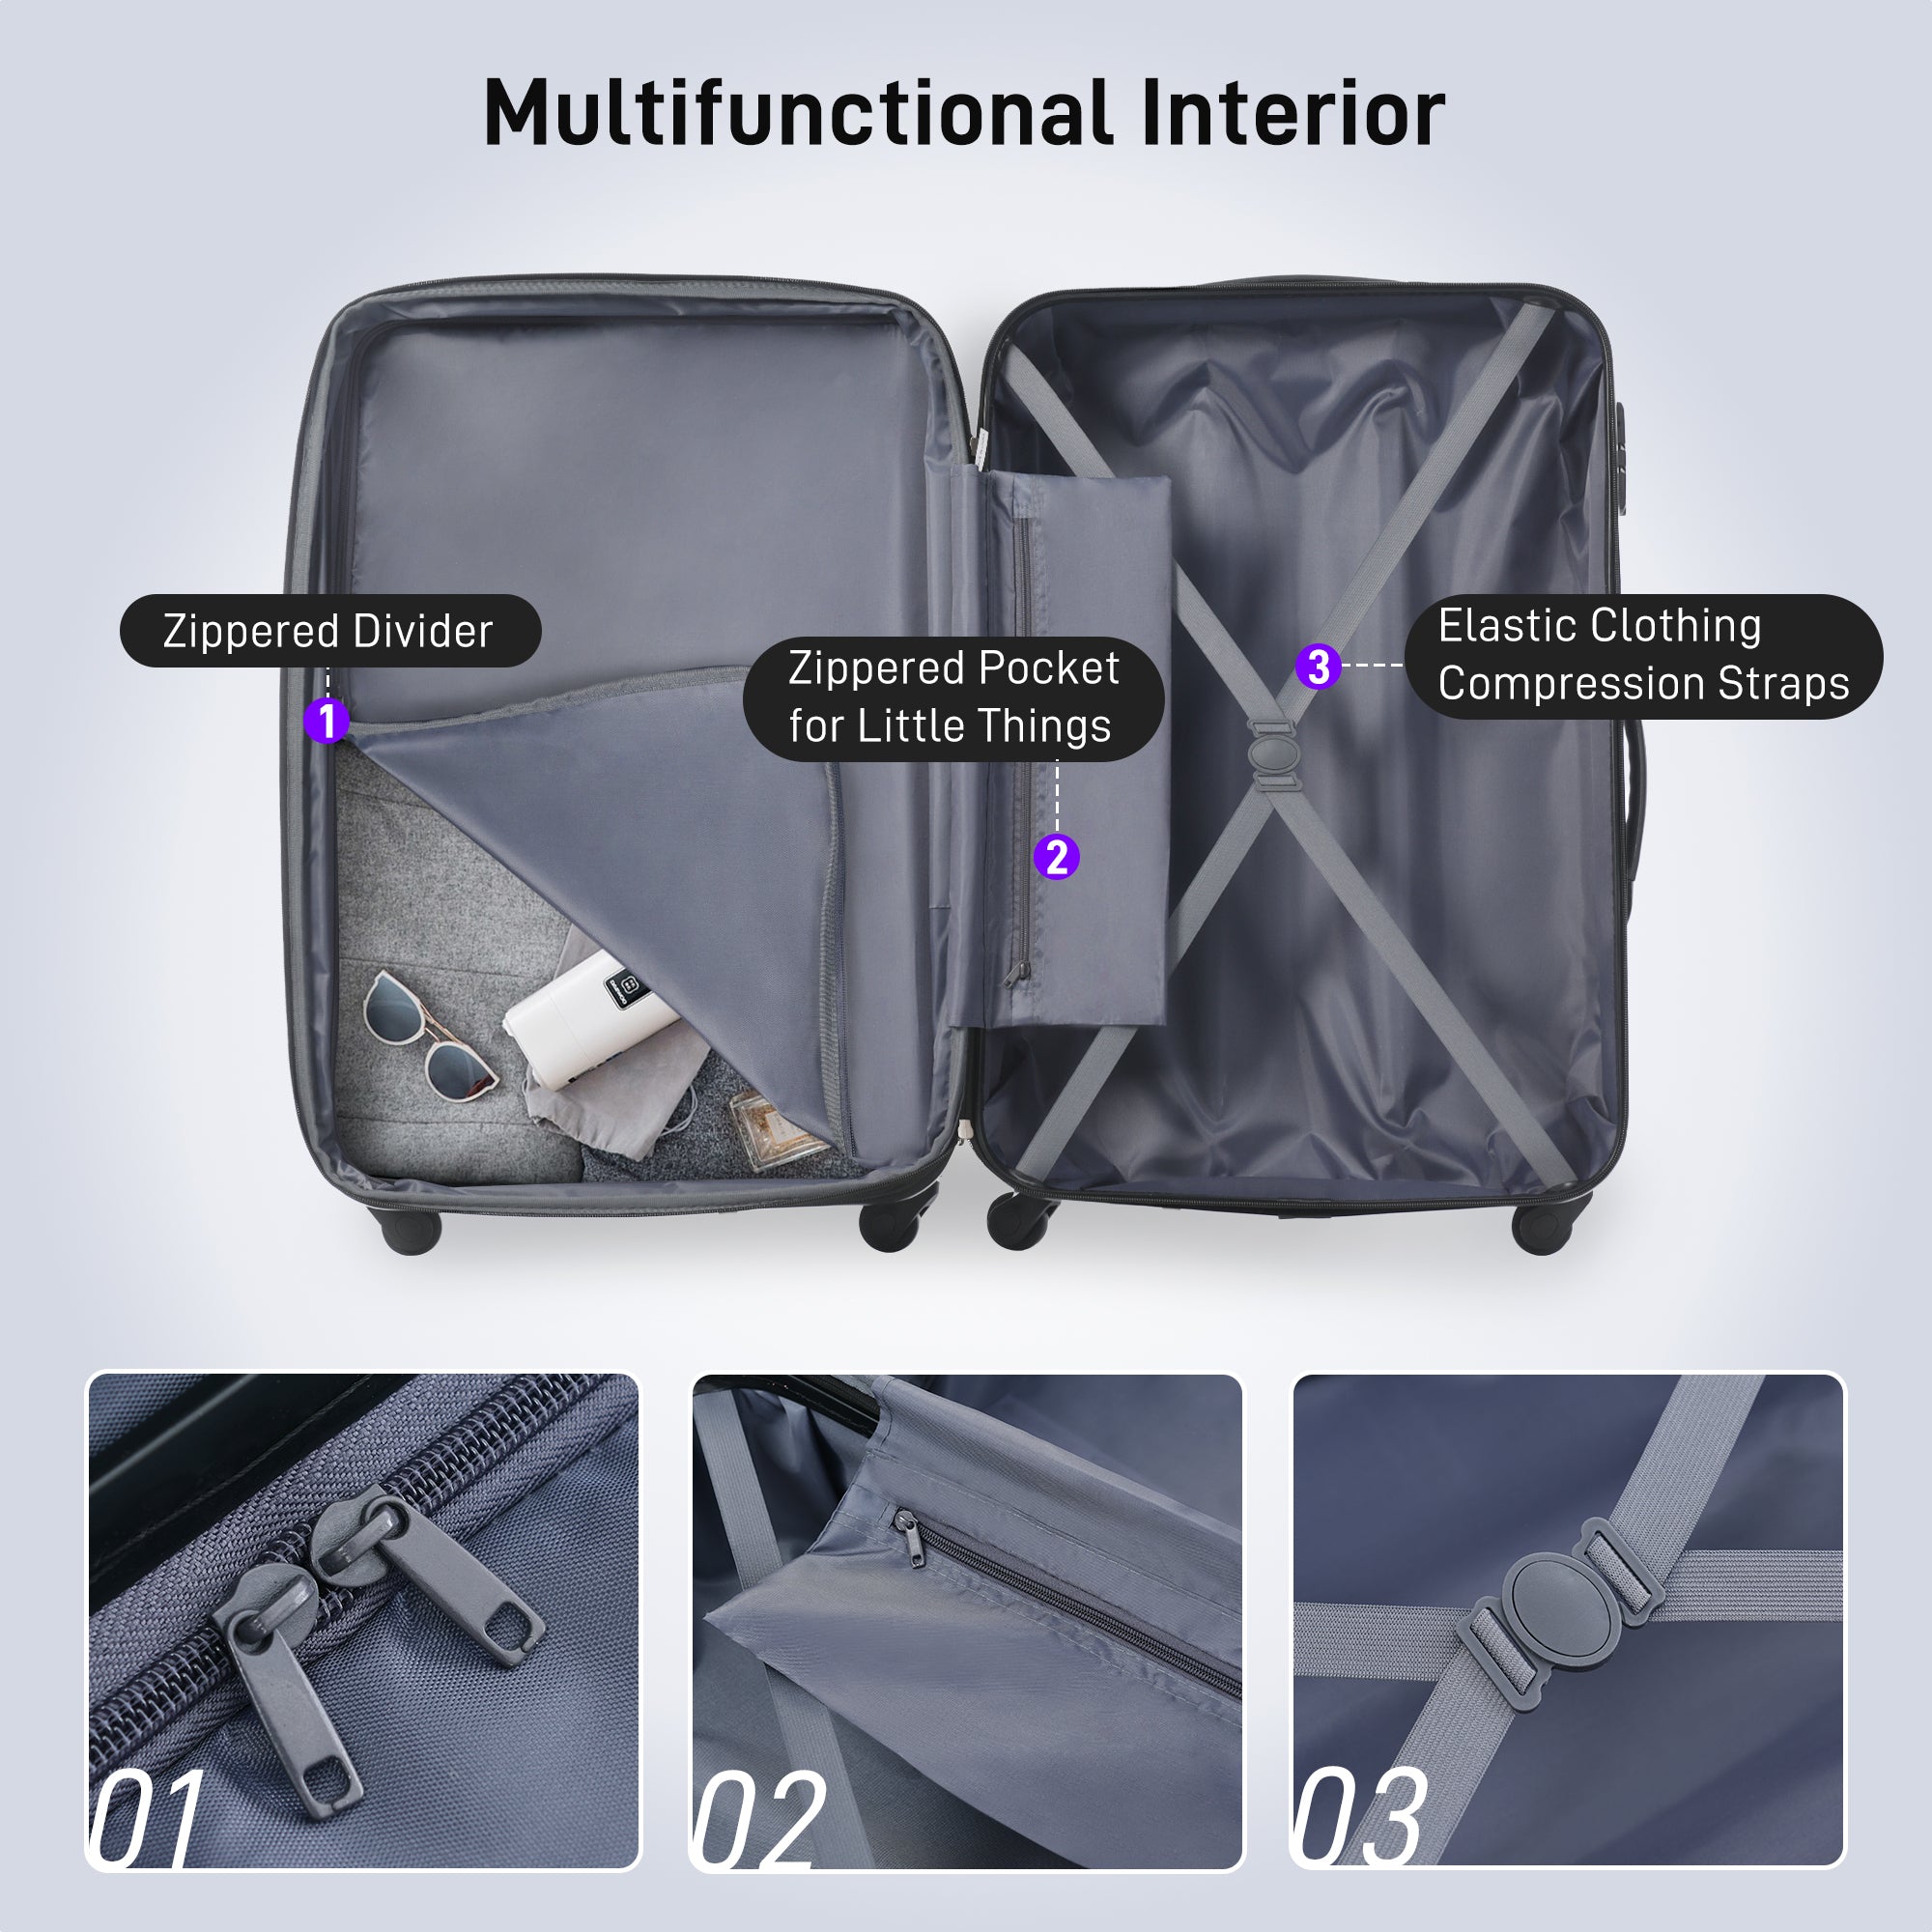 Luggage Sets of 2 Piece Carry on Suitcase Airline purple-abs